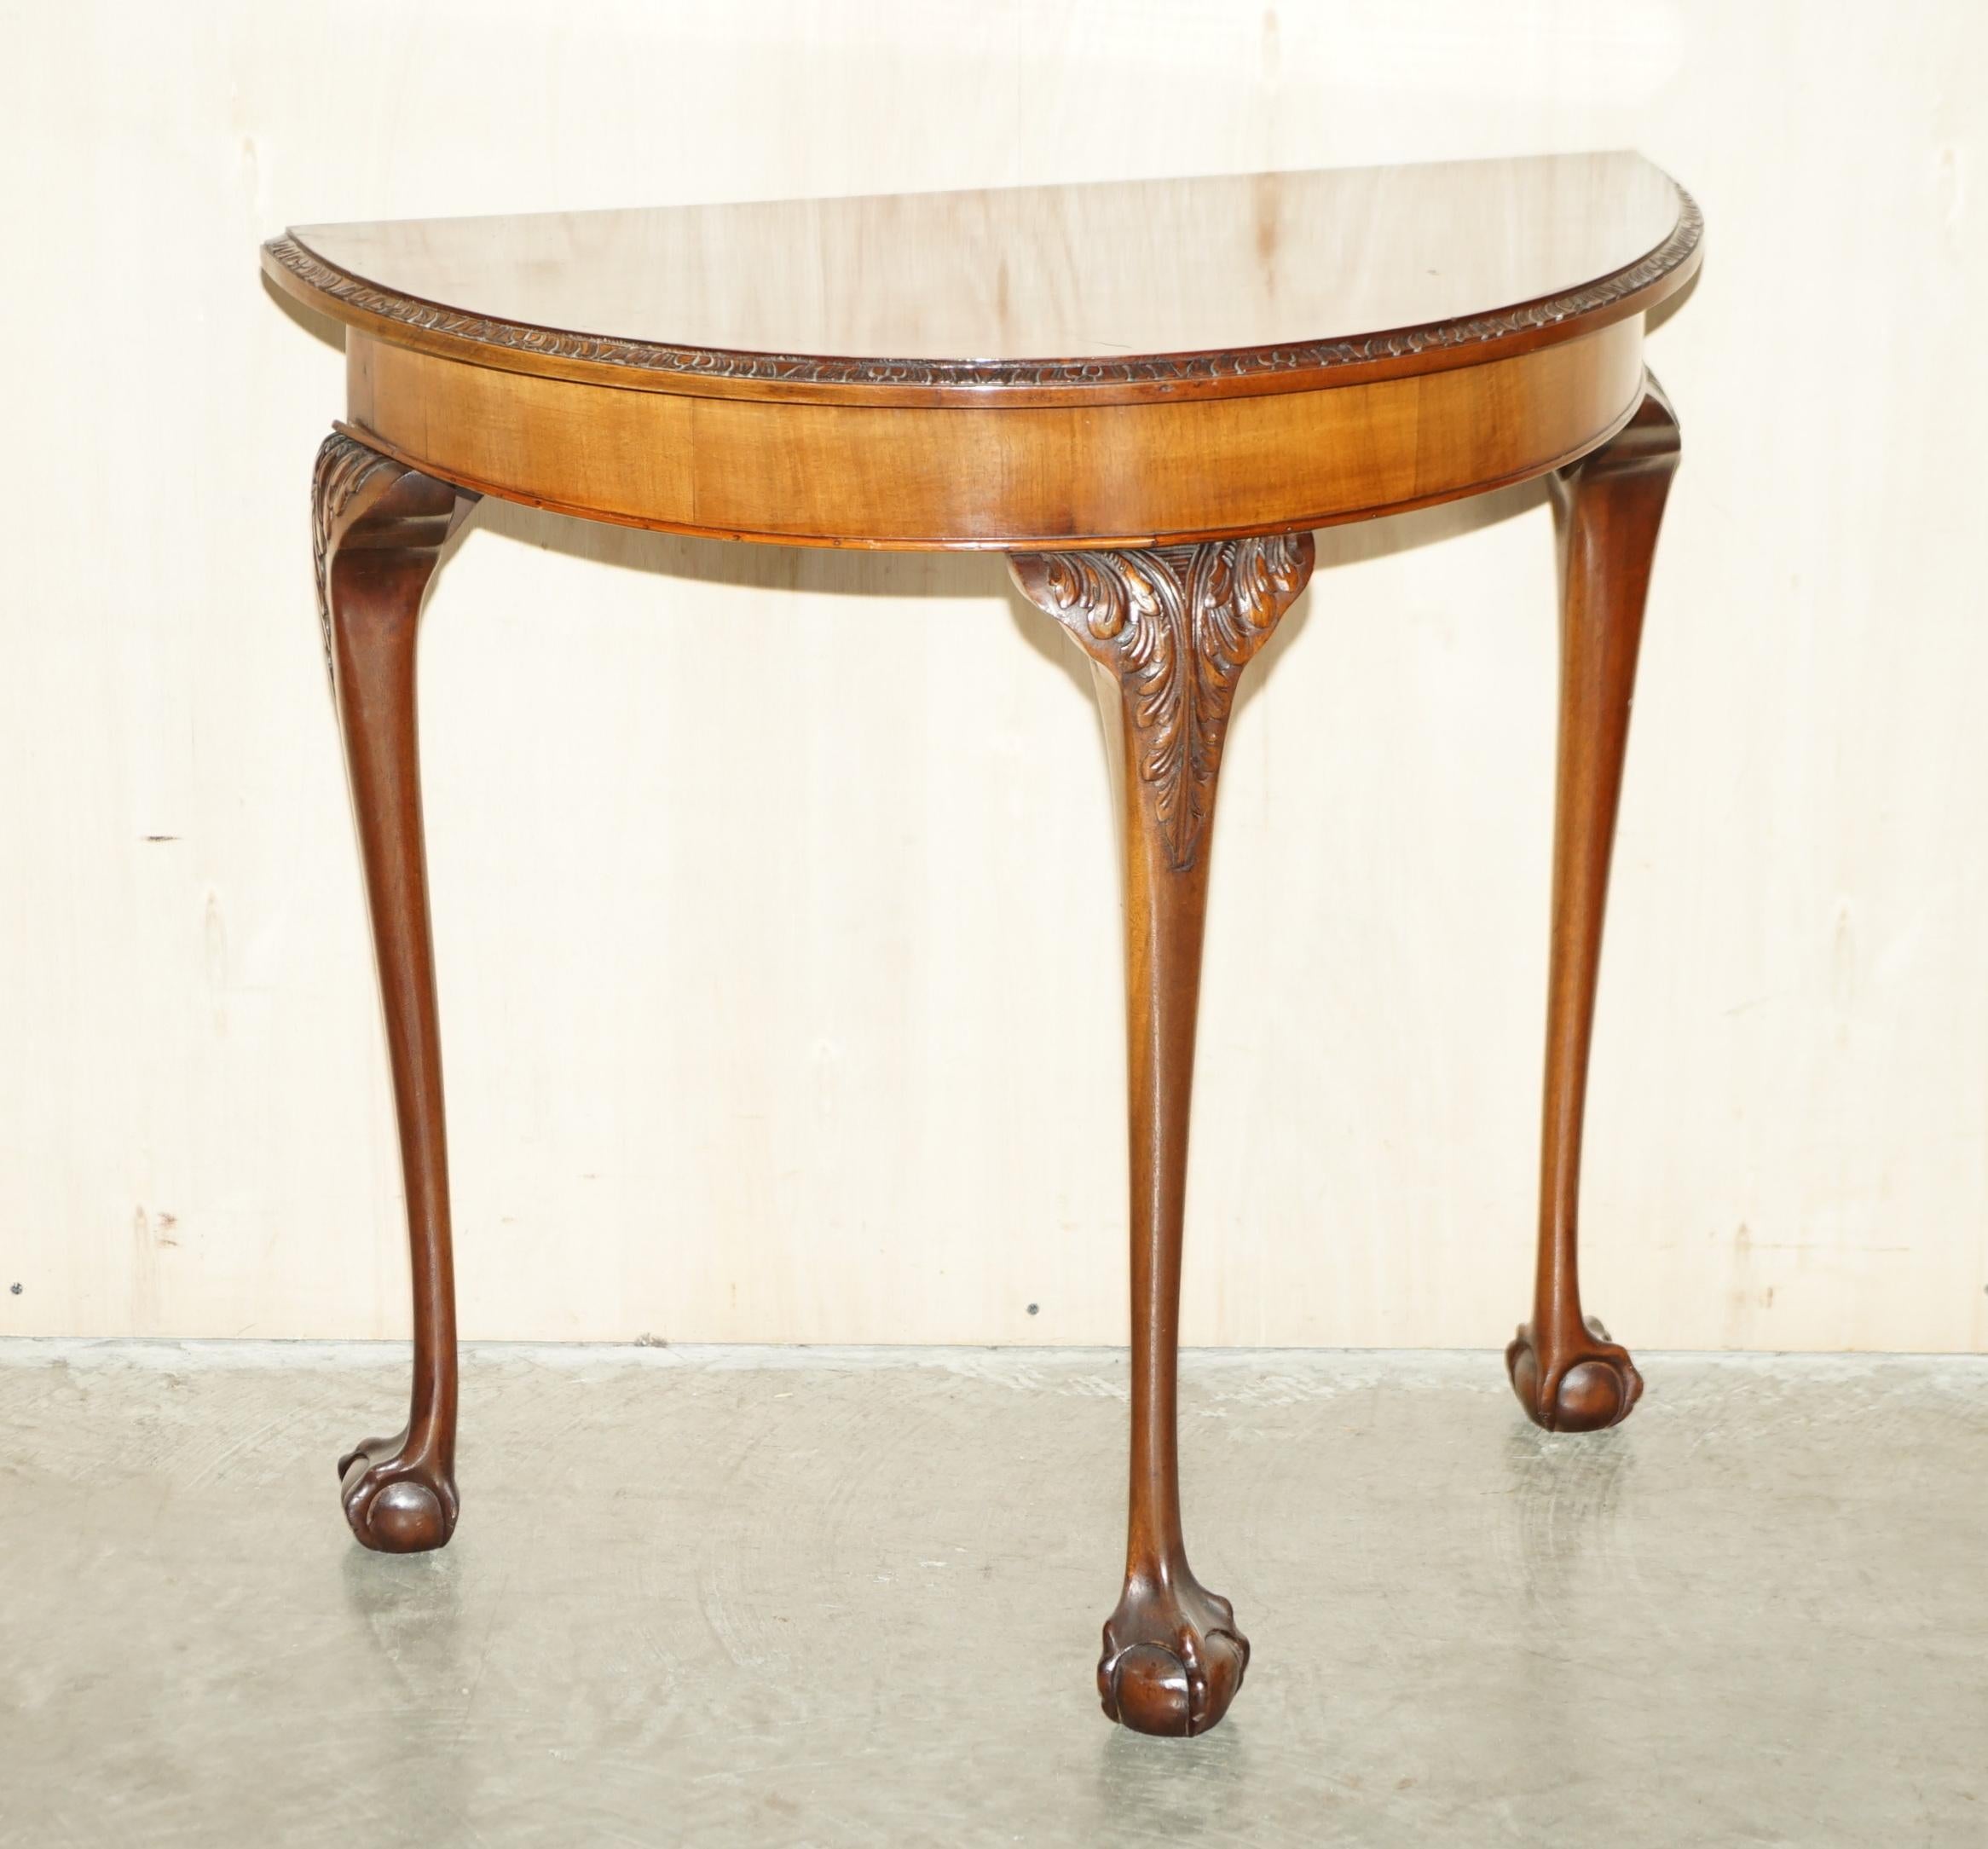 We are delighted to offer for sale this lovely circa 1880-1900 burr walnut demi lune console table with Claw & Ball legs.

A very good looking and well made piece, made in the Regency style however it is late Victorian. The legs are beautifully